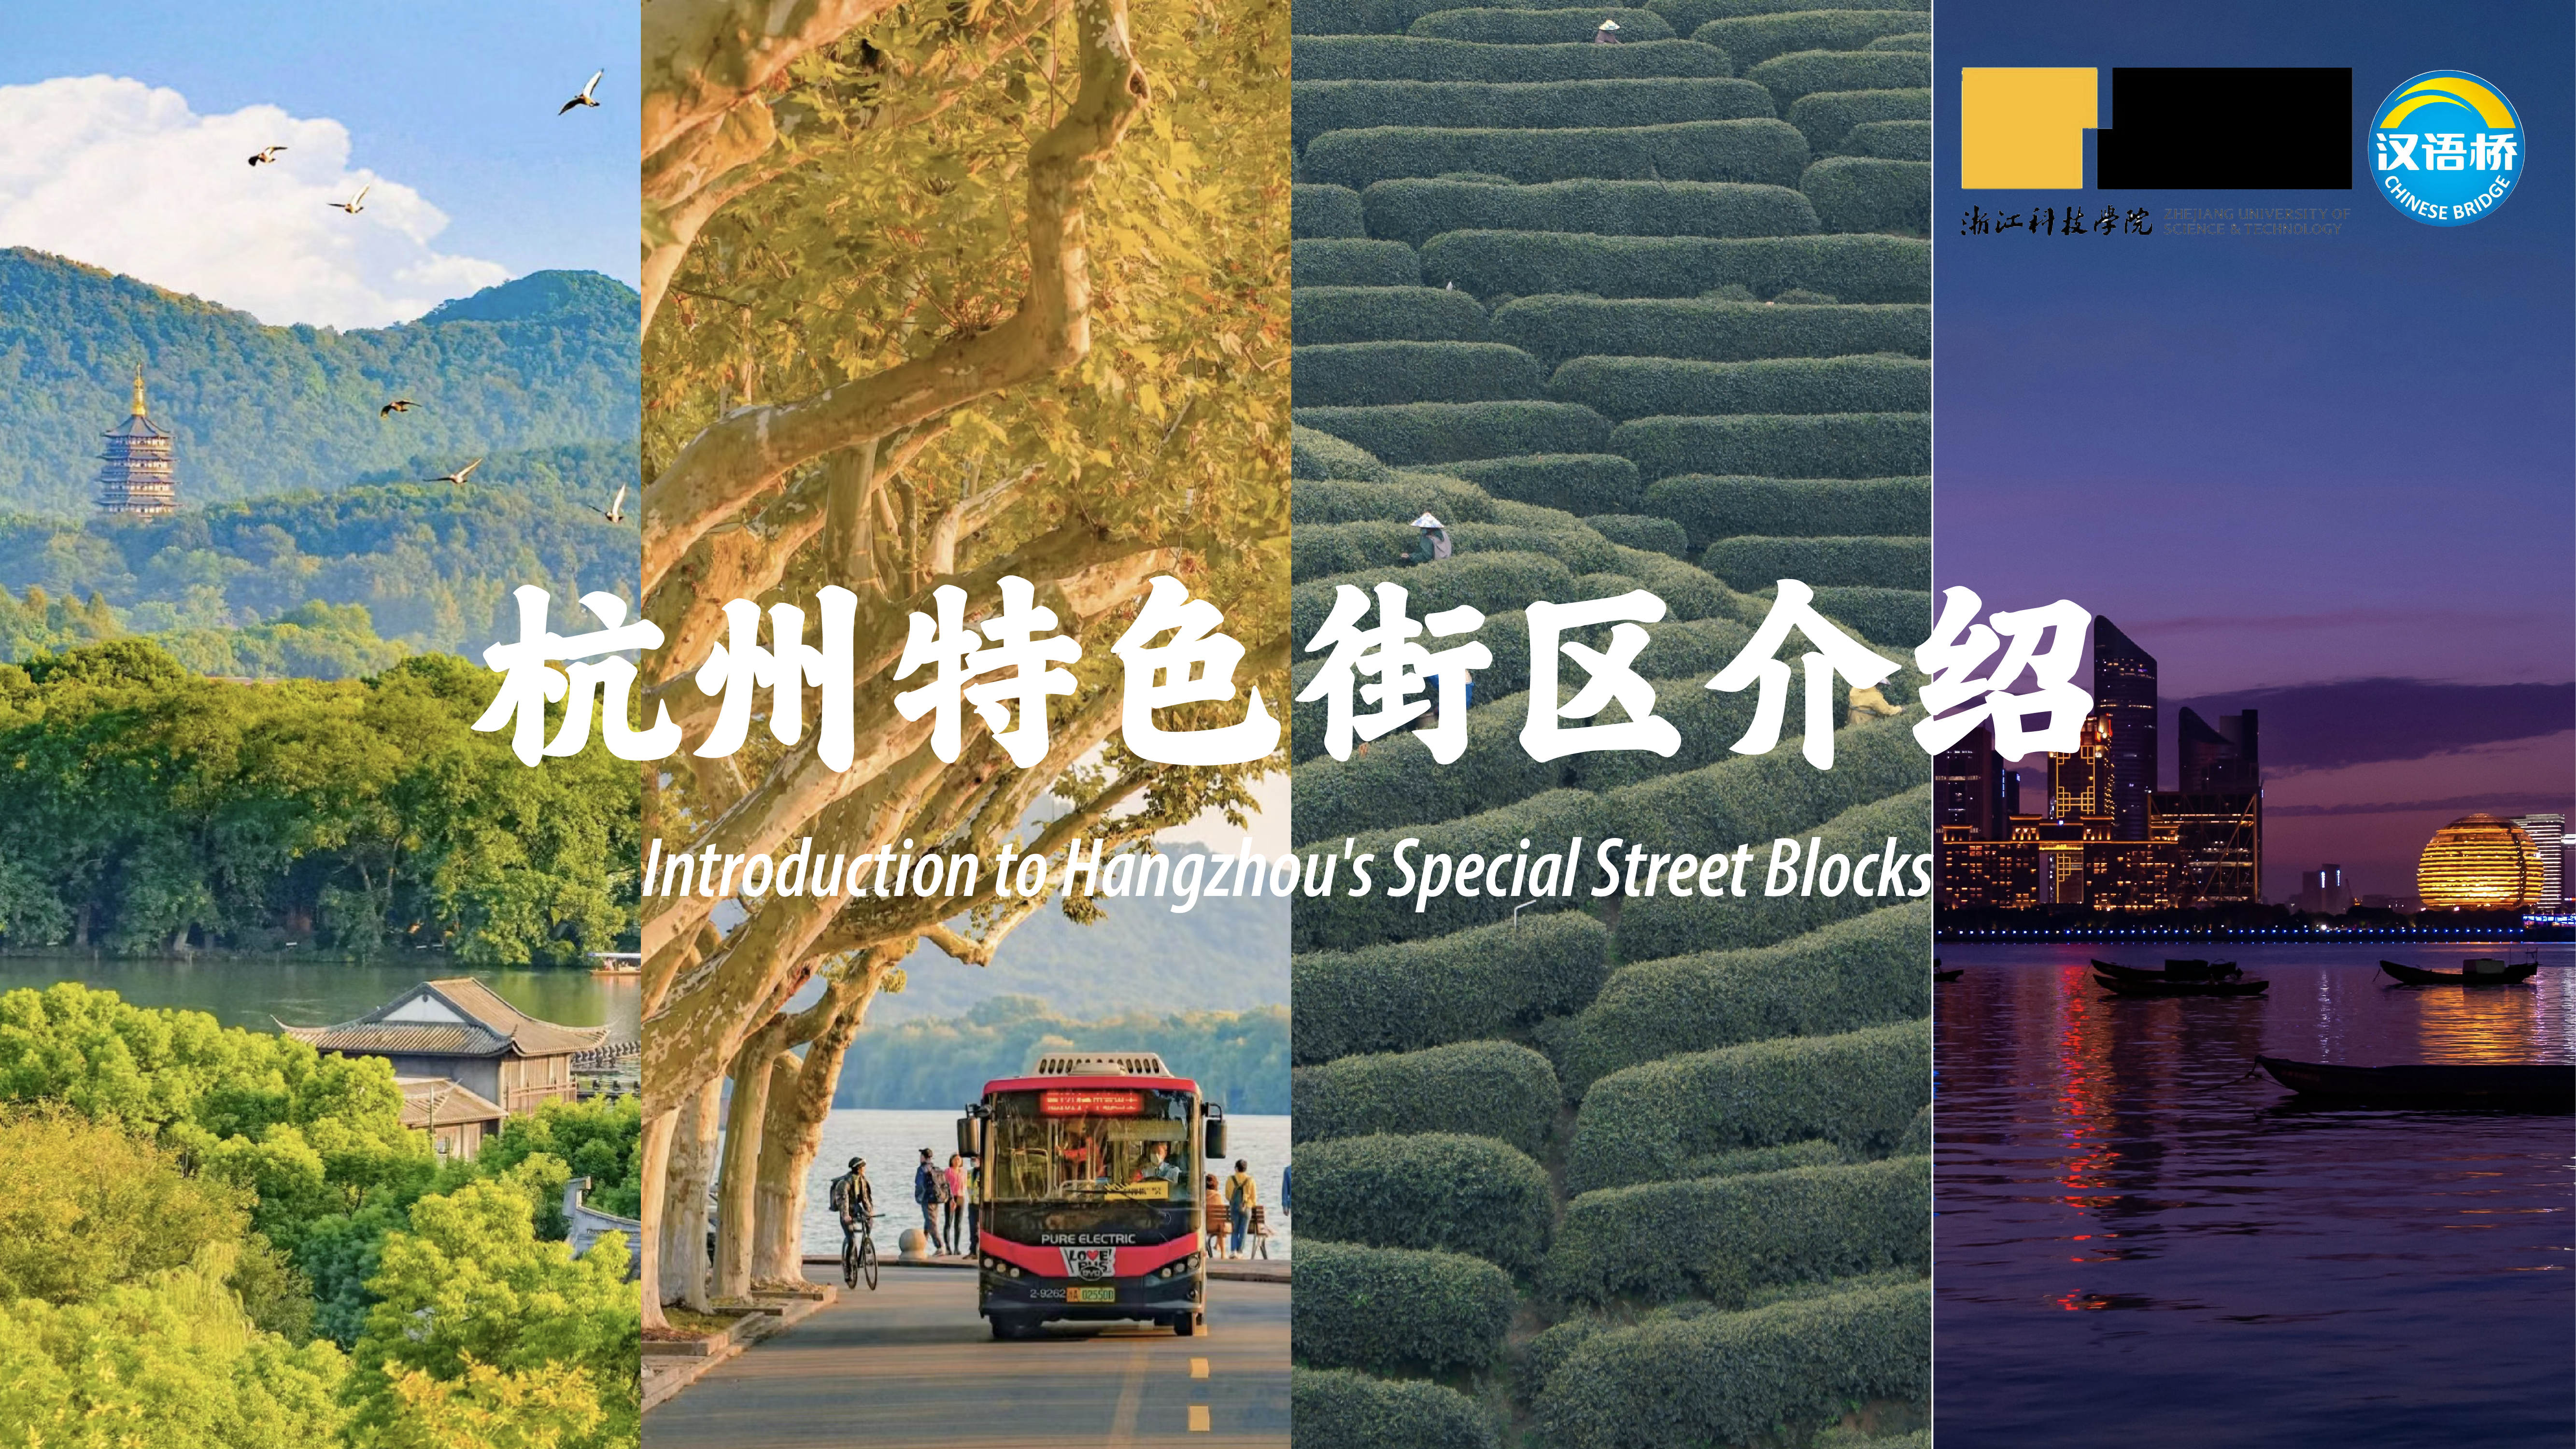 Introduction to Hangzhou’s Special Street Blocks